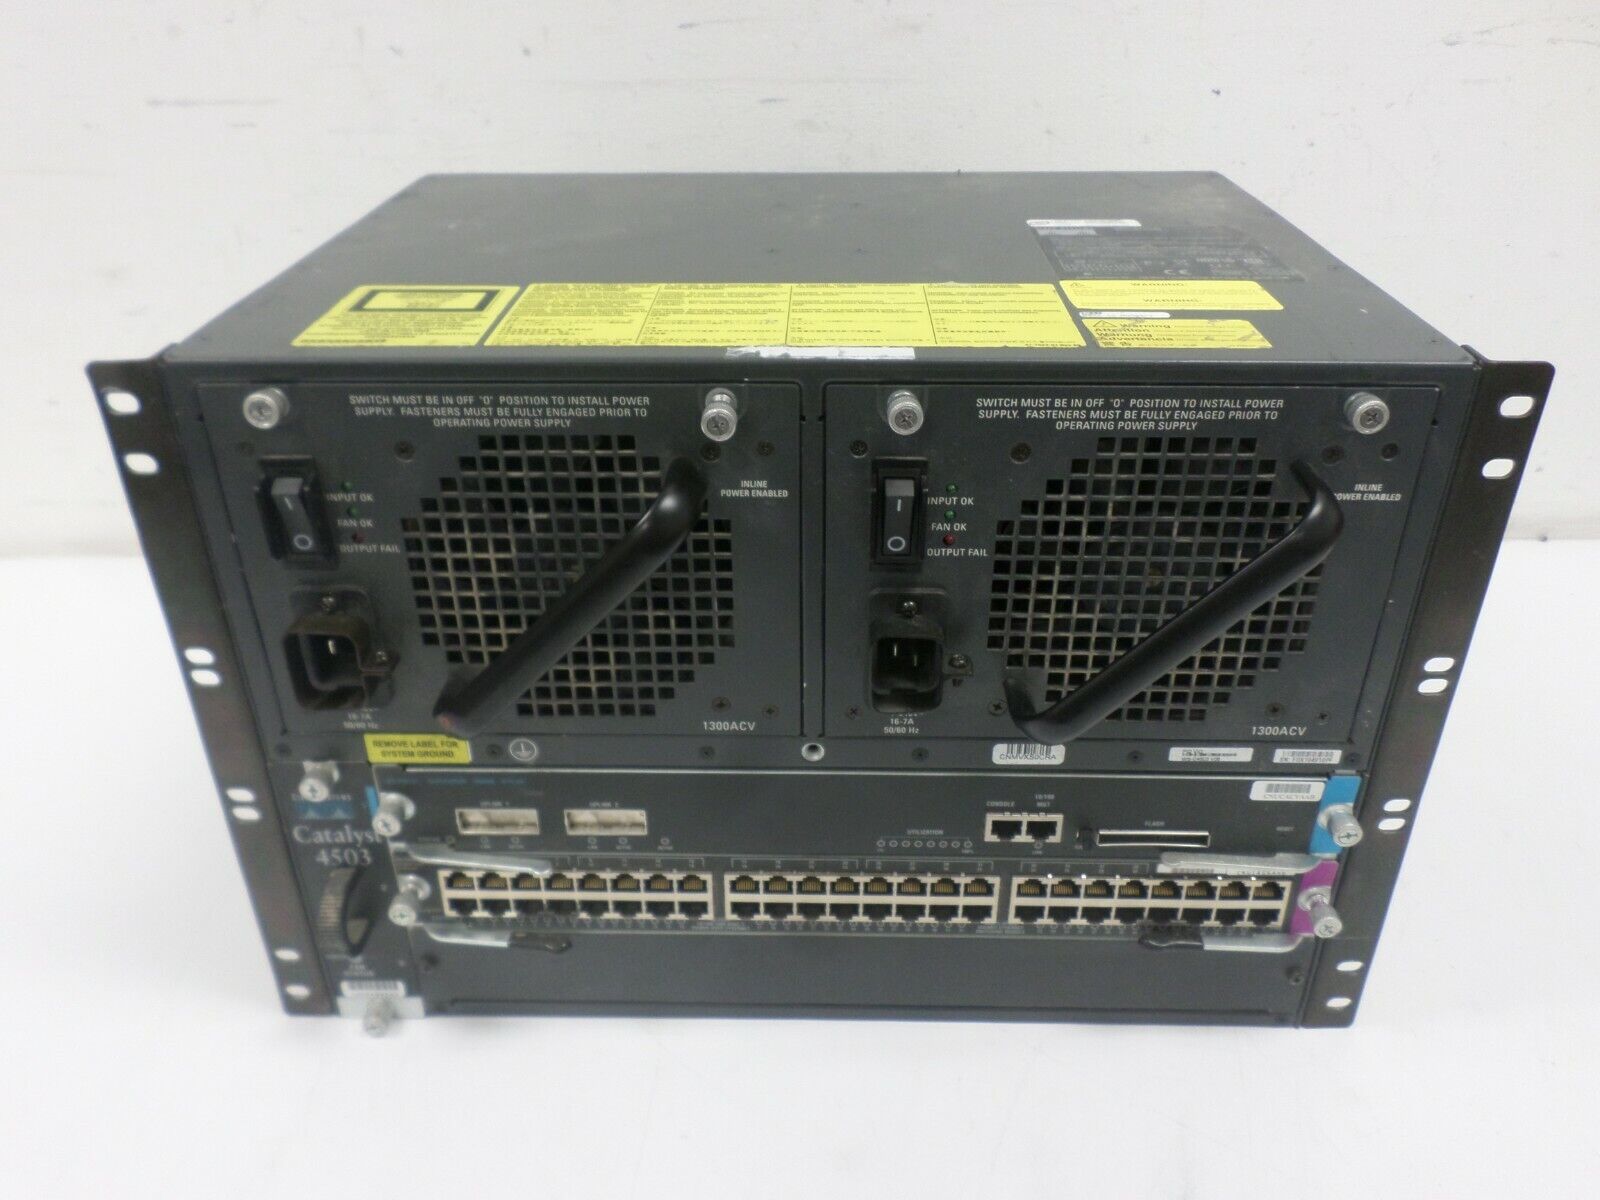 Cisco Catalyst 4503 WS-C4503 3-Slot Switch Chassis 